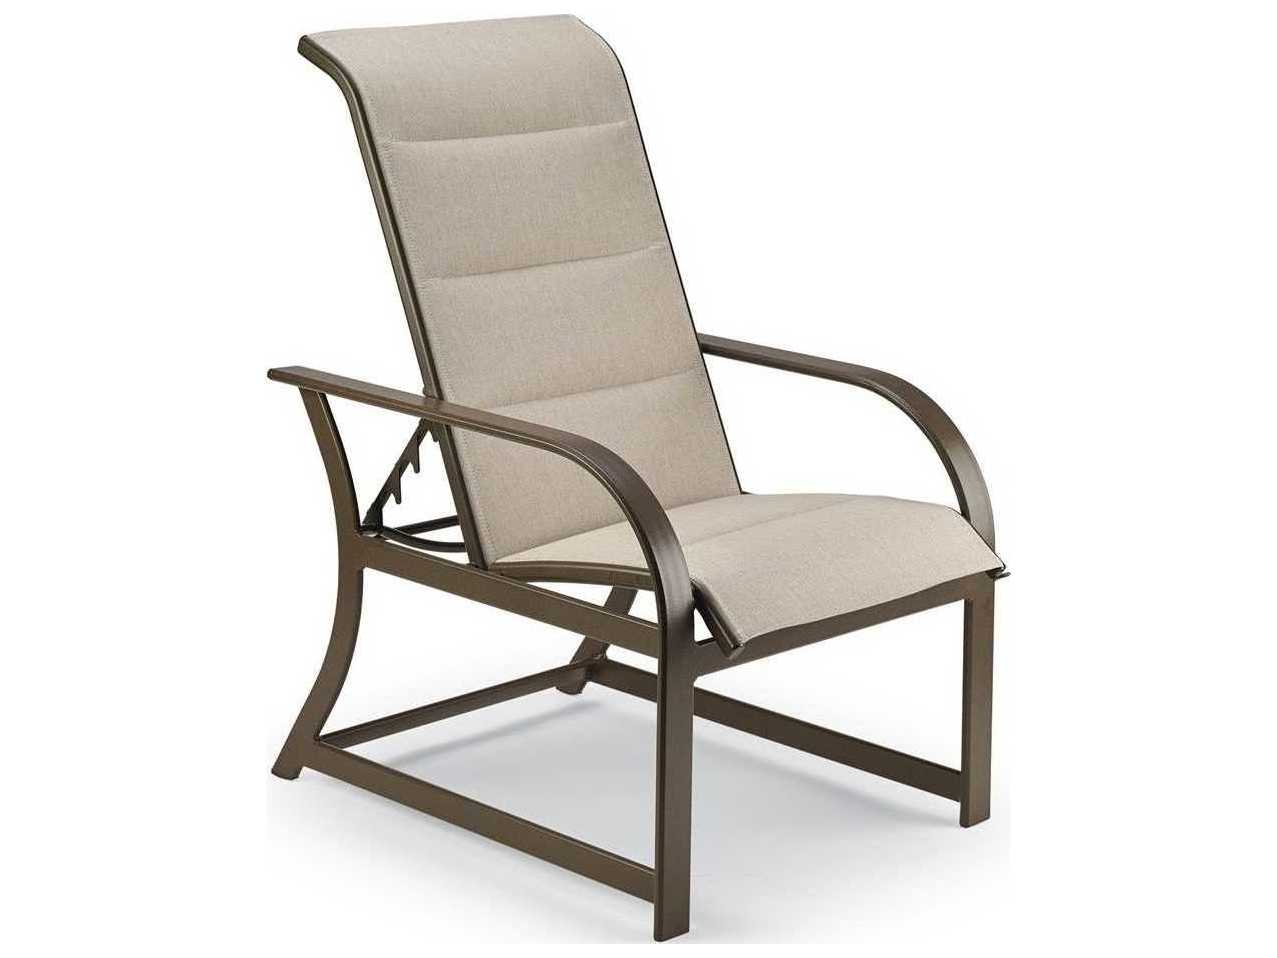 Winston Key West Padded Sling Aluminum Adjustable Chair WSM8017PS